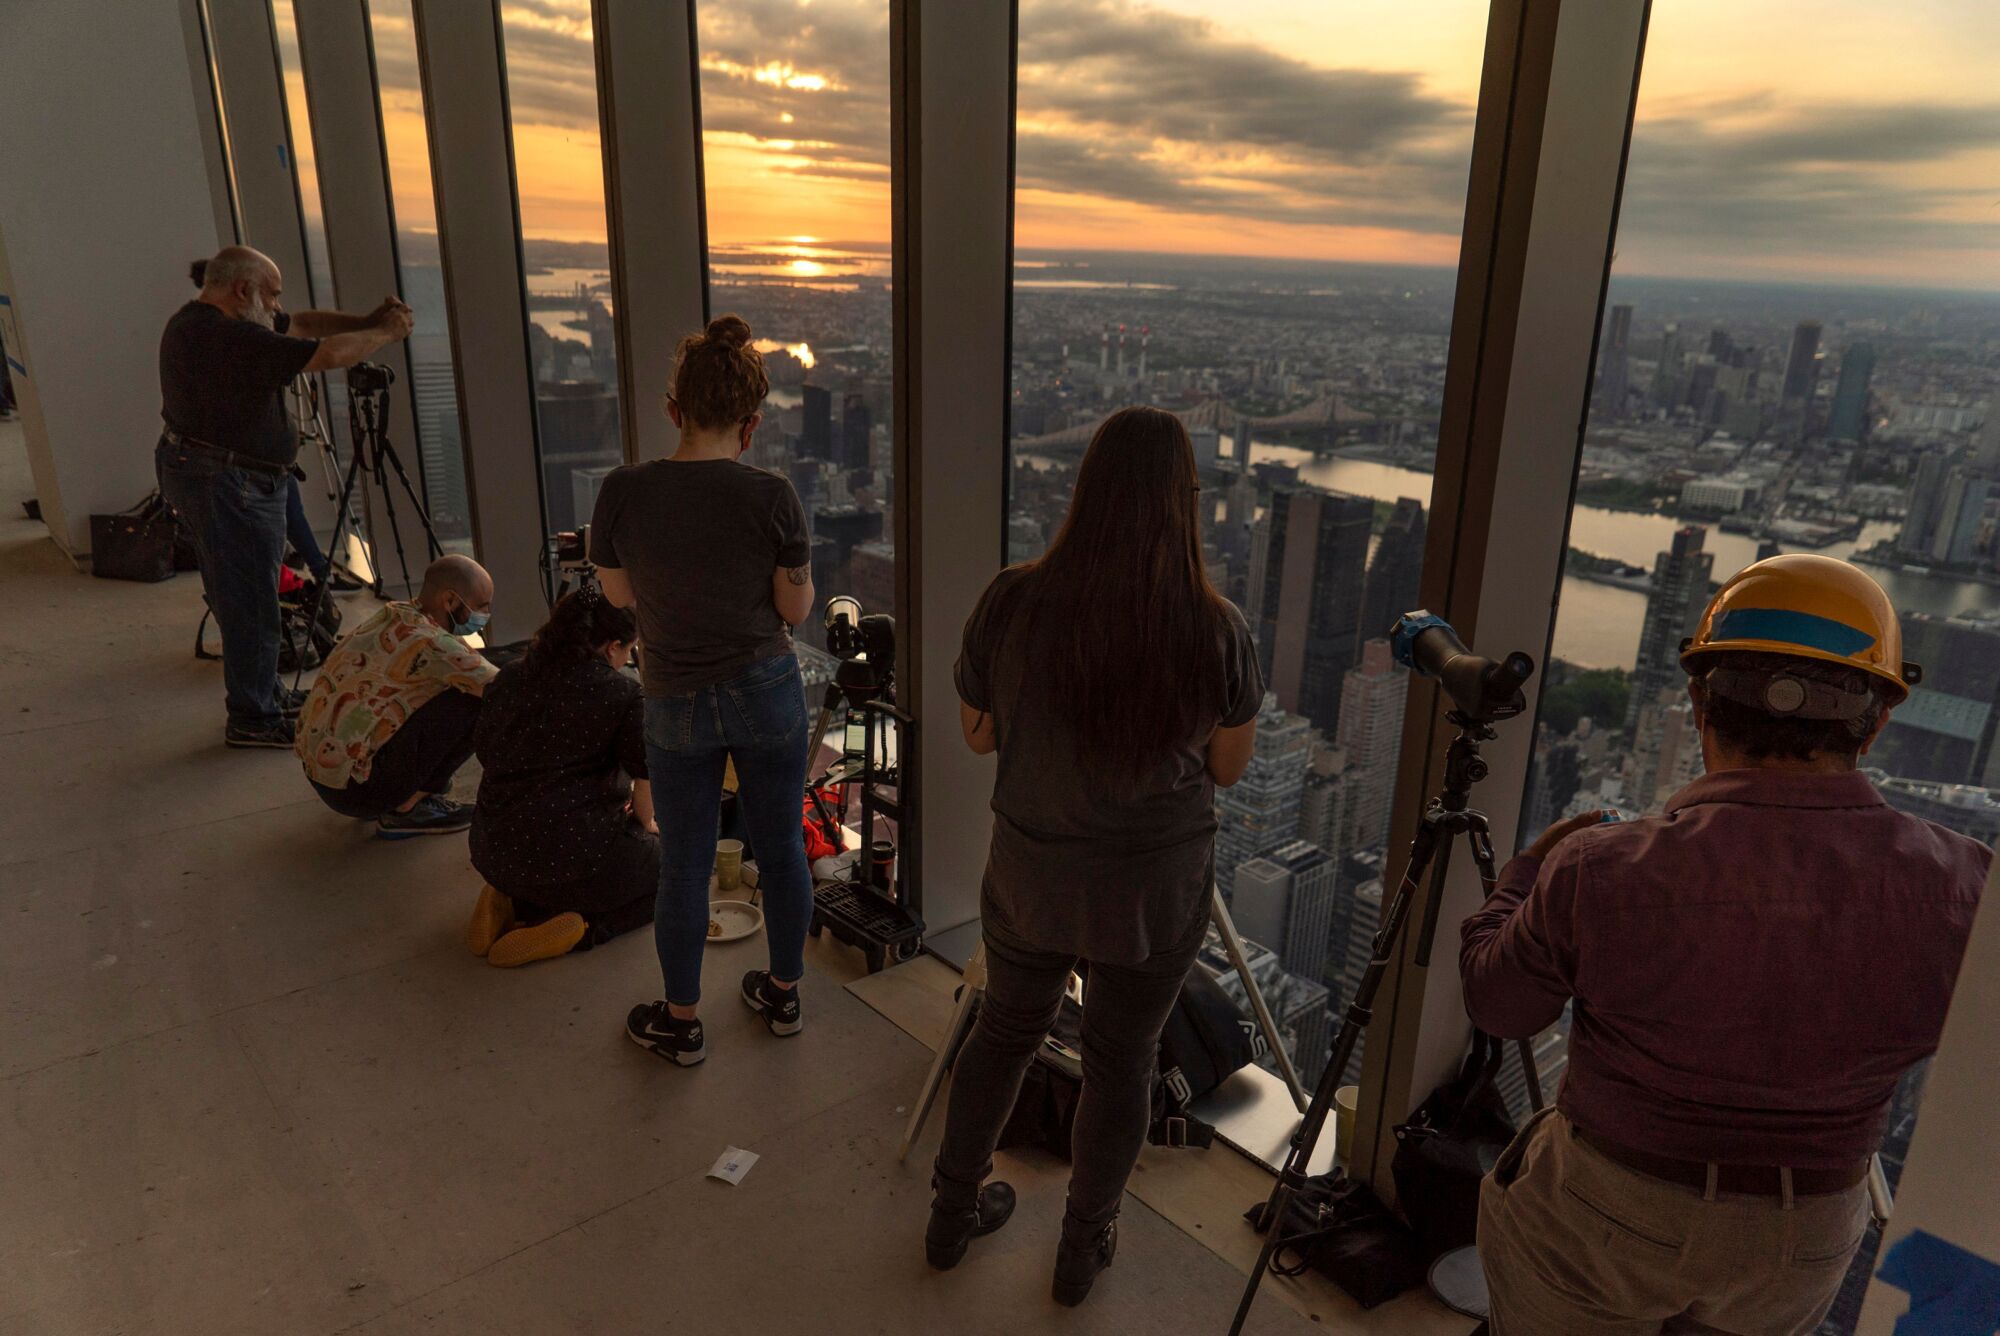 Amateur astronomers watch as the sun rises partially eclipsed in New York City.